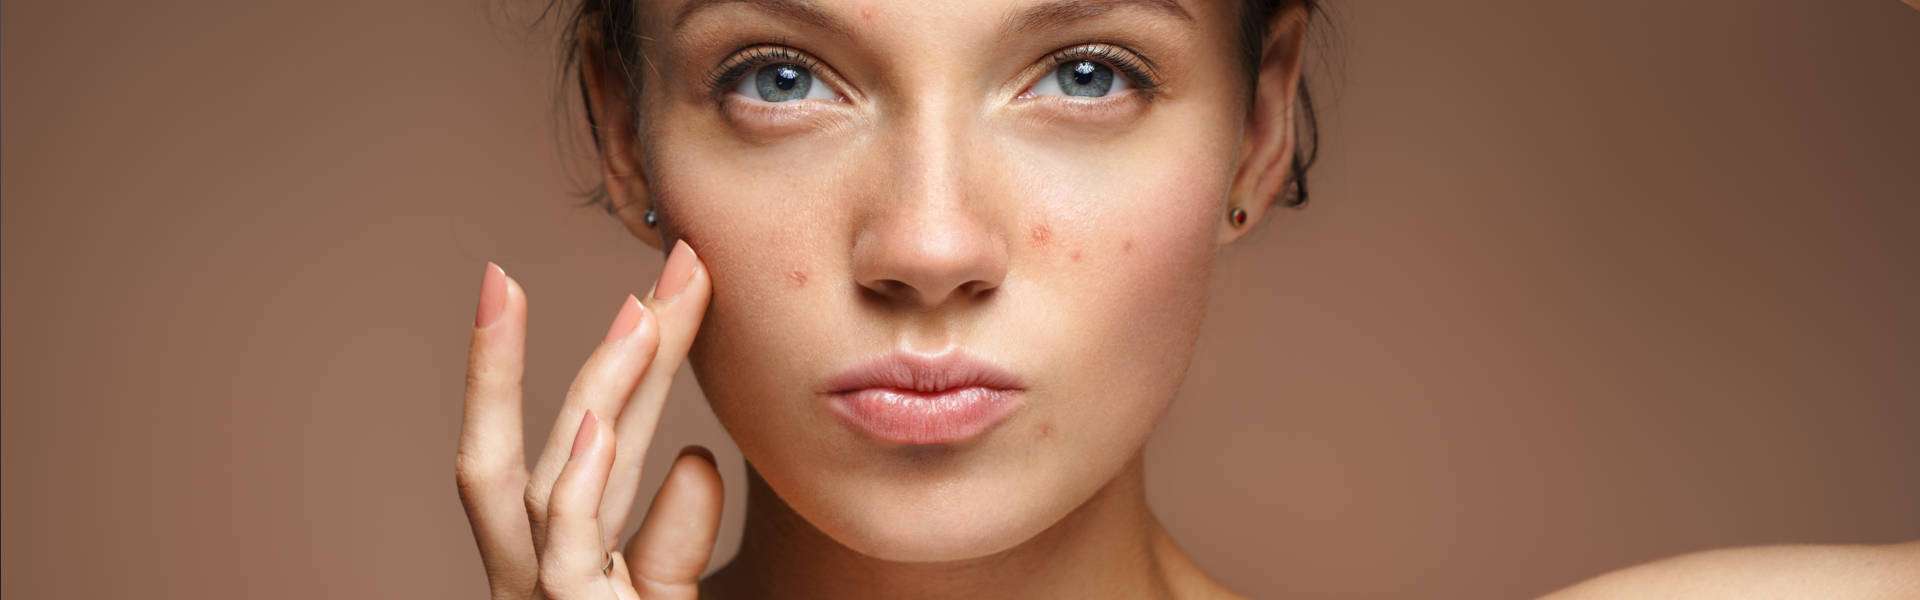 Acne: natural remedies to cure